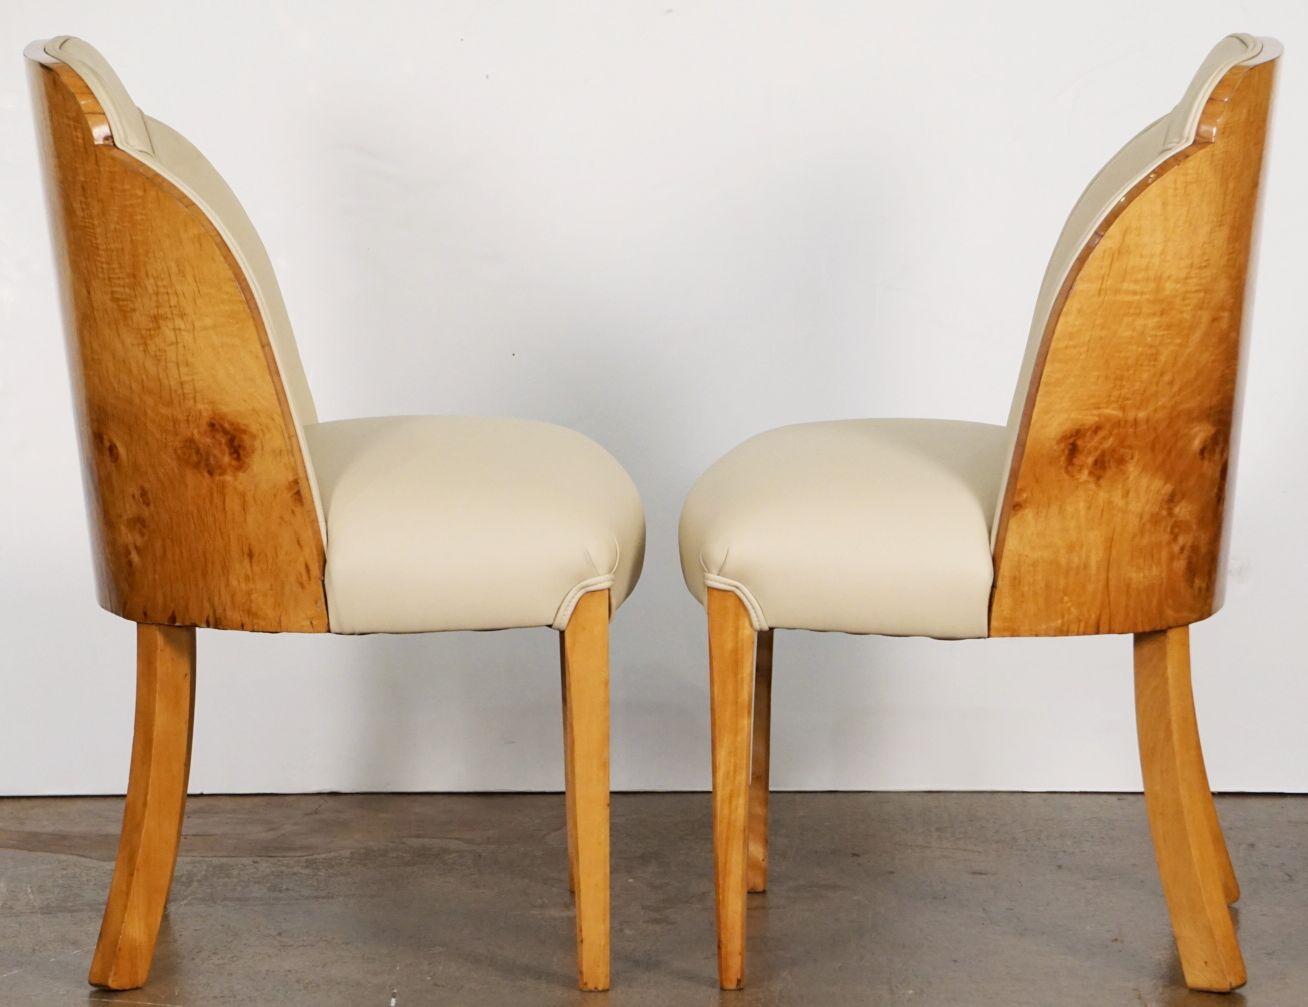 Bleached Art Deco Chairs of Burled Walnut and Leather Attributed to Harry and Lou Epstein For Sale